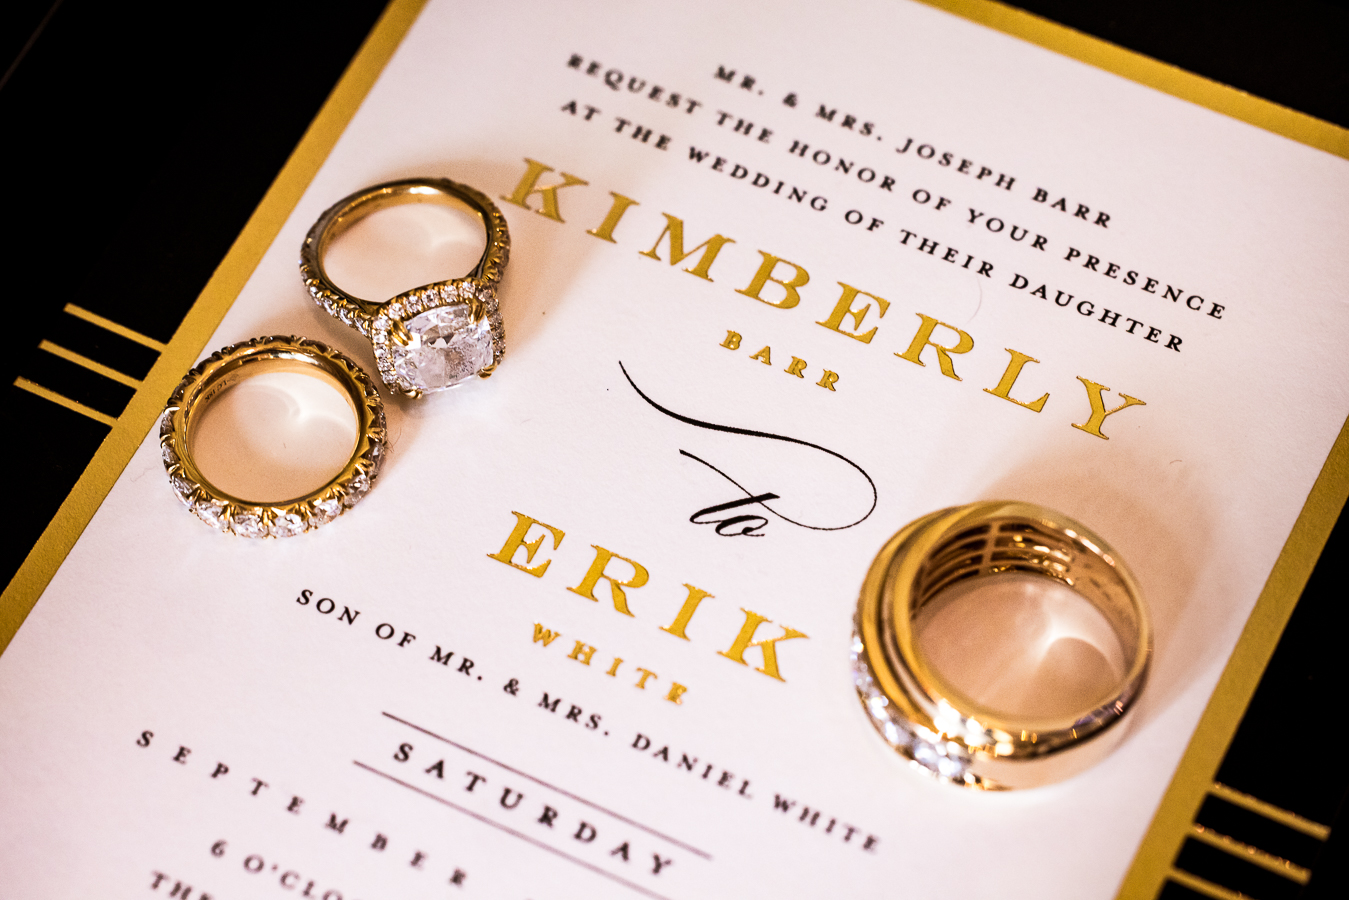 palace at somerset park wedding photographer, lisa rhinehart, captures this unique black and gold wedding theme when detail photos are taken of the couples gold rings with their black and gold invitation 